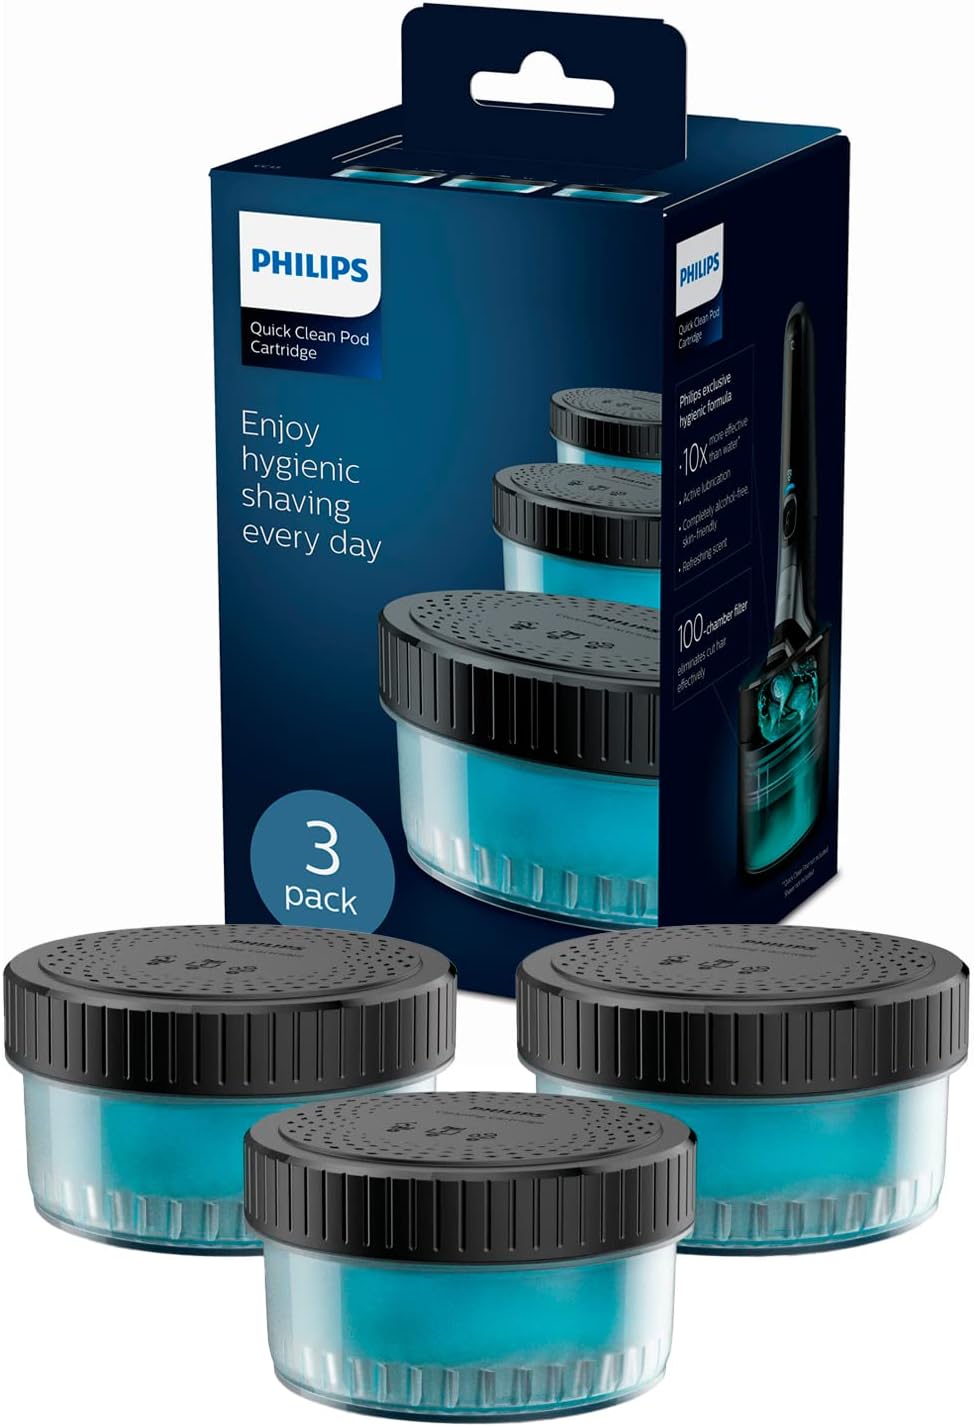 Philips Quick Clean Pod Cartridge for Electric Shaver, 3-Pack, Quick Clean Pod Compatible - CC13/50